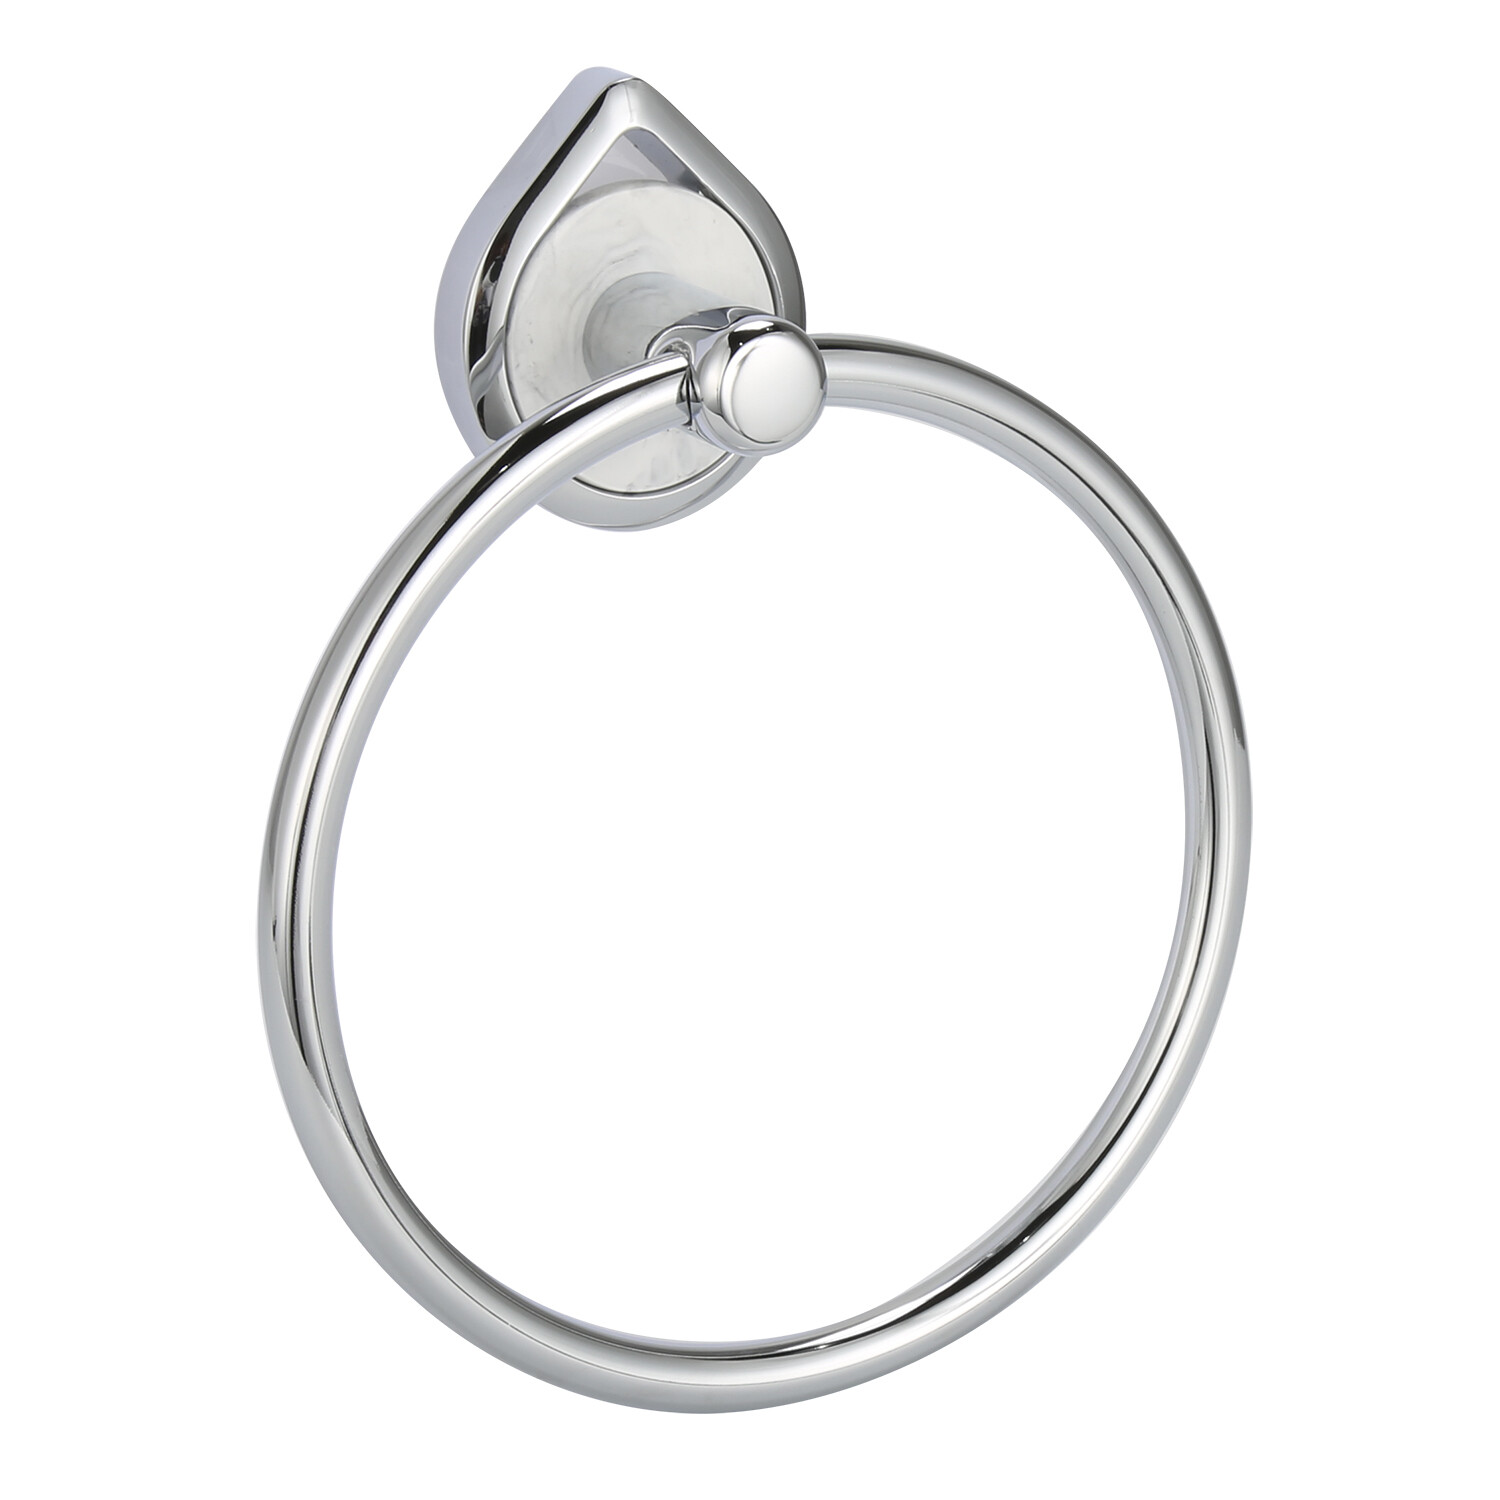 Dewsbury Silver and Marble Towel Ring Image